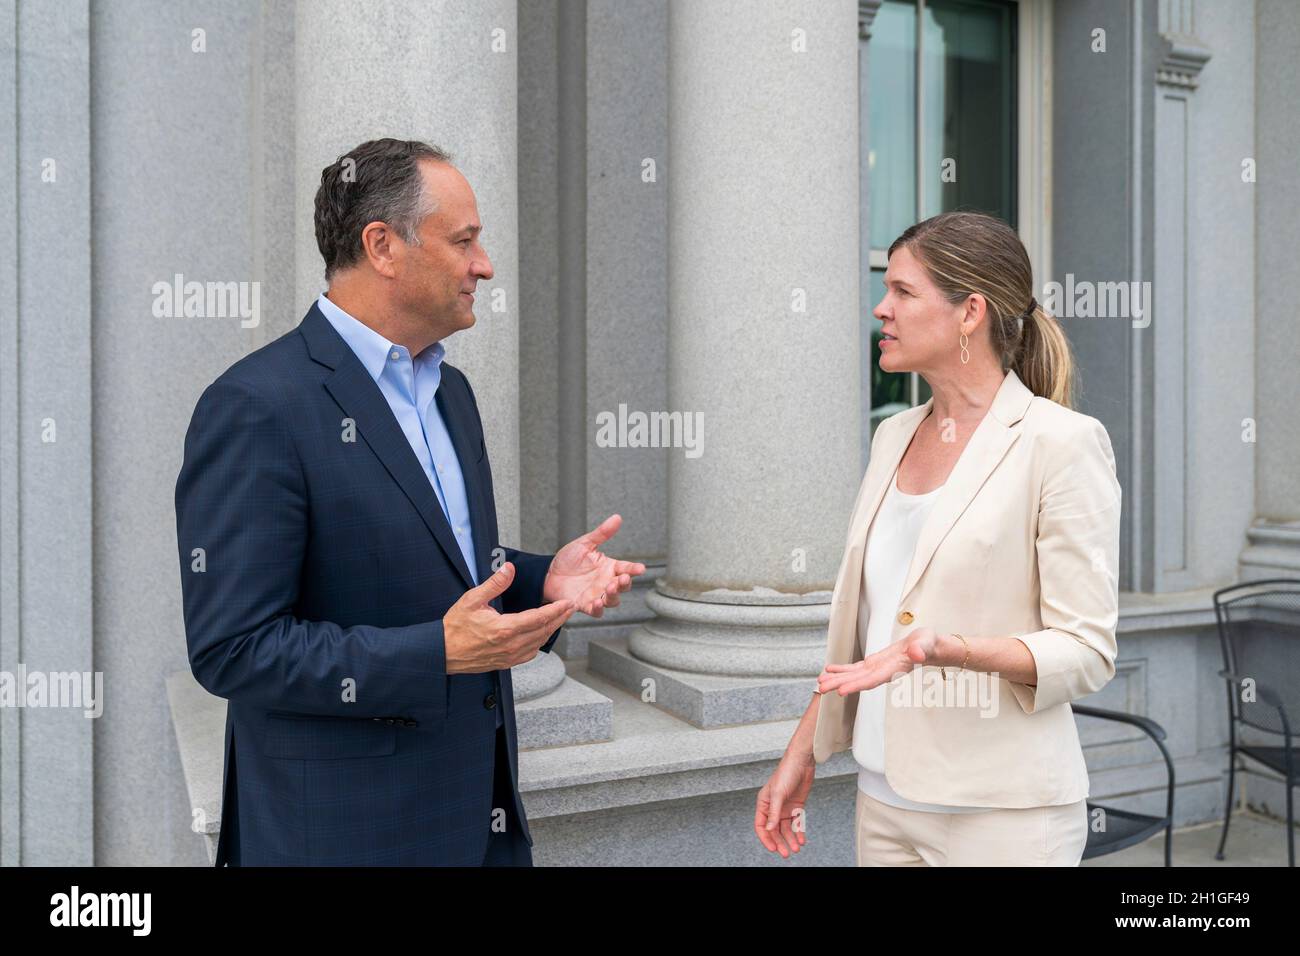 Washington, United States of America. 03 August, 2021. U.S Second Gentleman Douglas Emhoff, left, and his Chief of Staff Julie Mason meet outside on the balcony in the Eisenhower Executive Office Building at the White House August 3, 2021in Washington, D.C. Credit: Cameron Smith/White House Photo/Alamy Live News Stock Photo